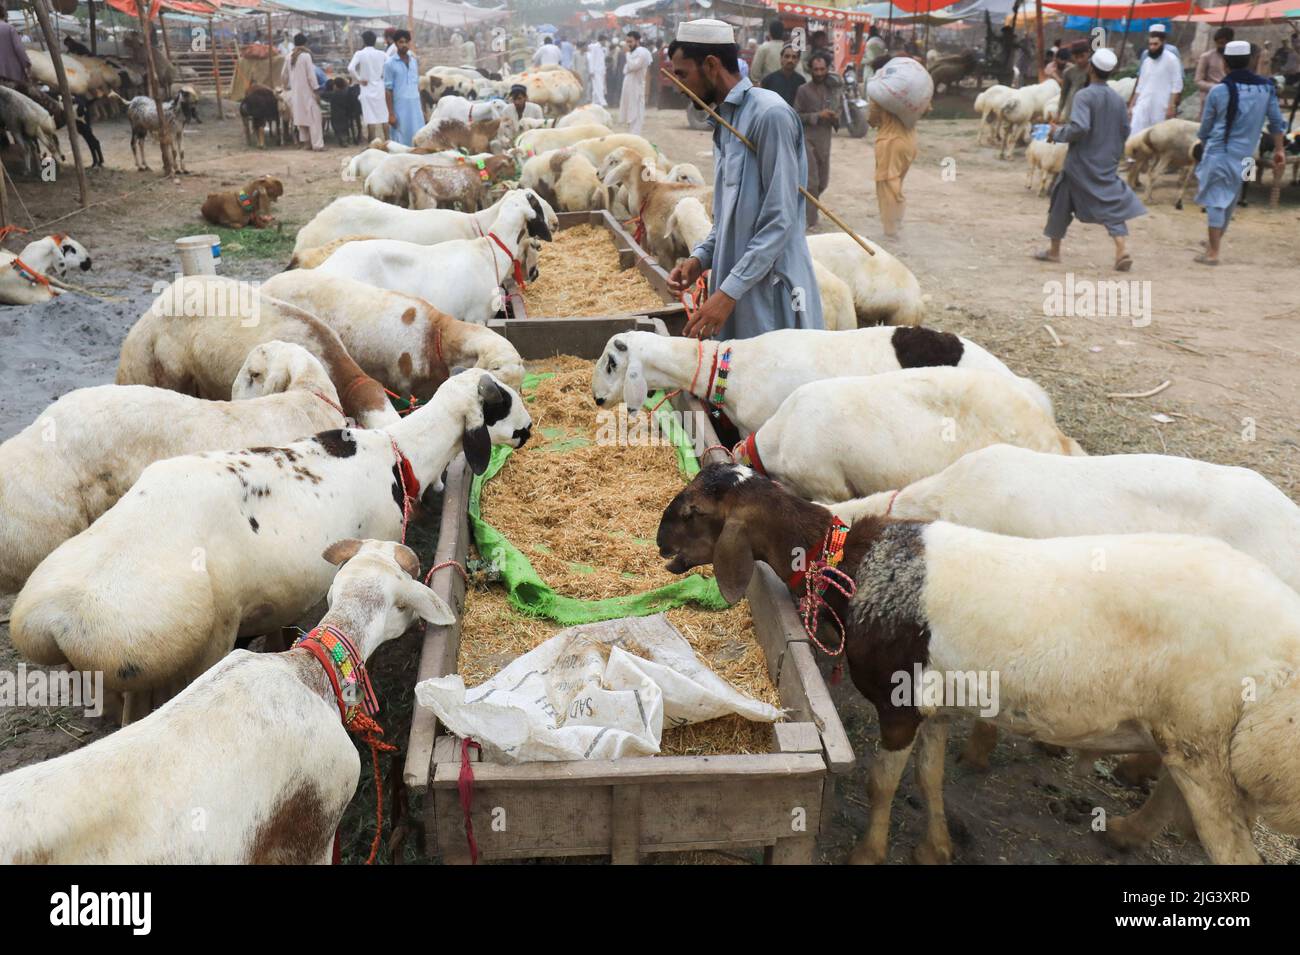 A man feeds his sacrificial animals for sale at a cattle market, ahead of the Eid al-Adha festival in Peshawar, Pakistan July 7, 2022. REUTERS/Fayaz Aziz Stock Photo